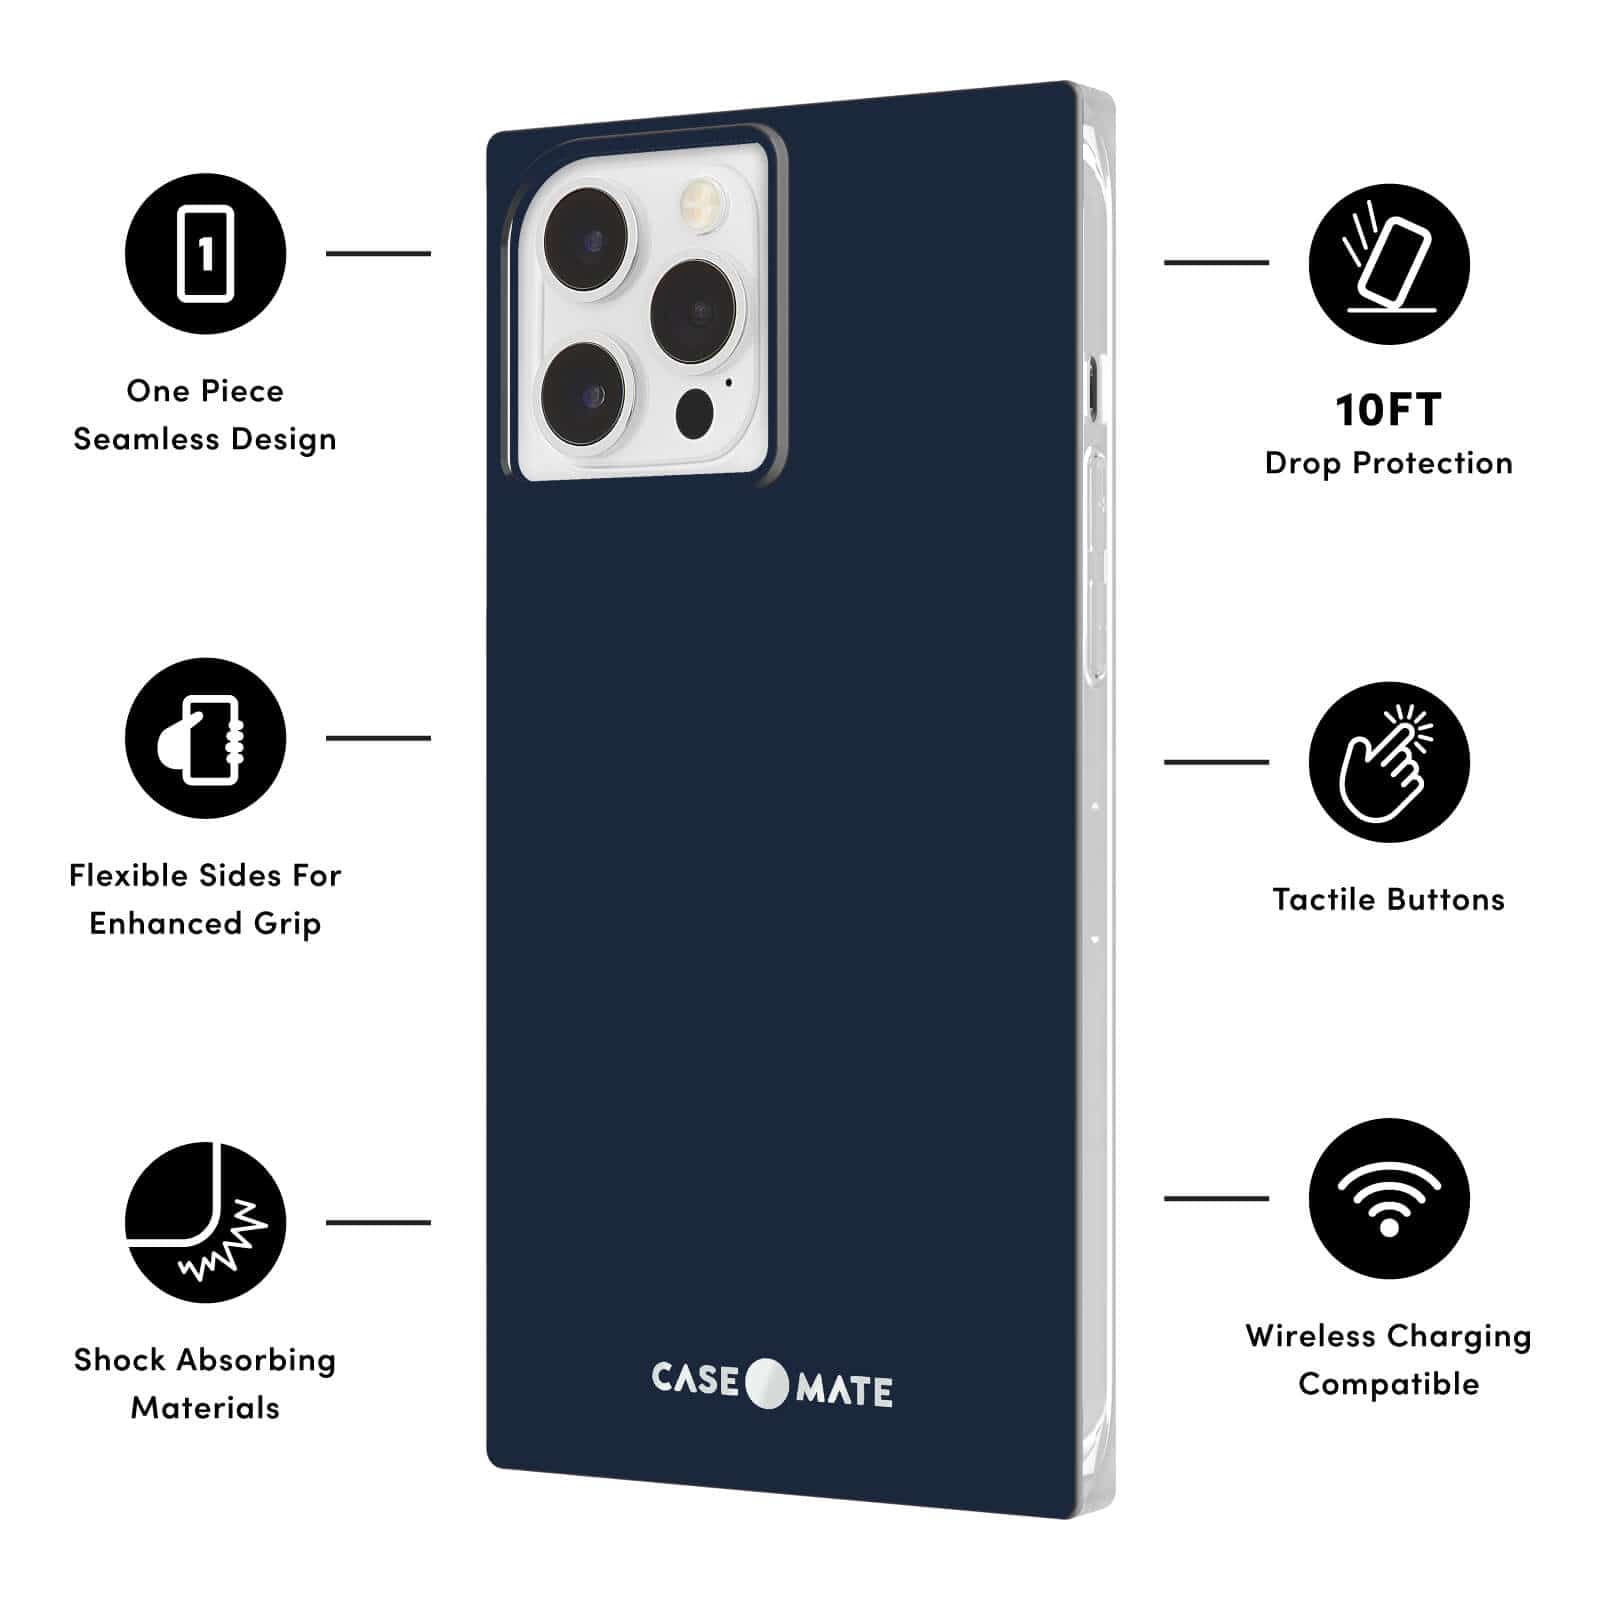 Features One Piece Seamless Design, Flexible Sides for Enhanced Grip, Shock Absorbing Materials, 10 ft Drop Protection, Tactile Buttons, Wireless Charging Compatible. color::Navy